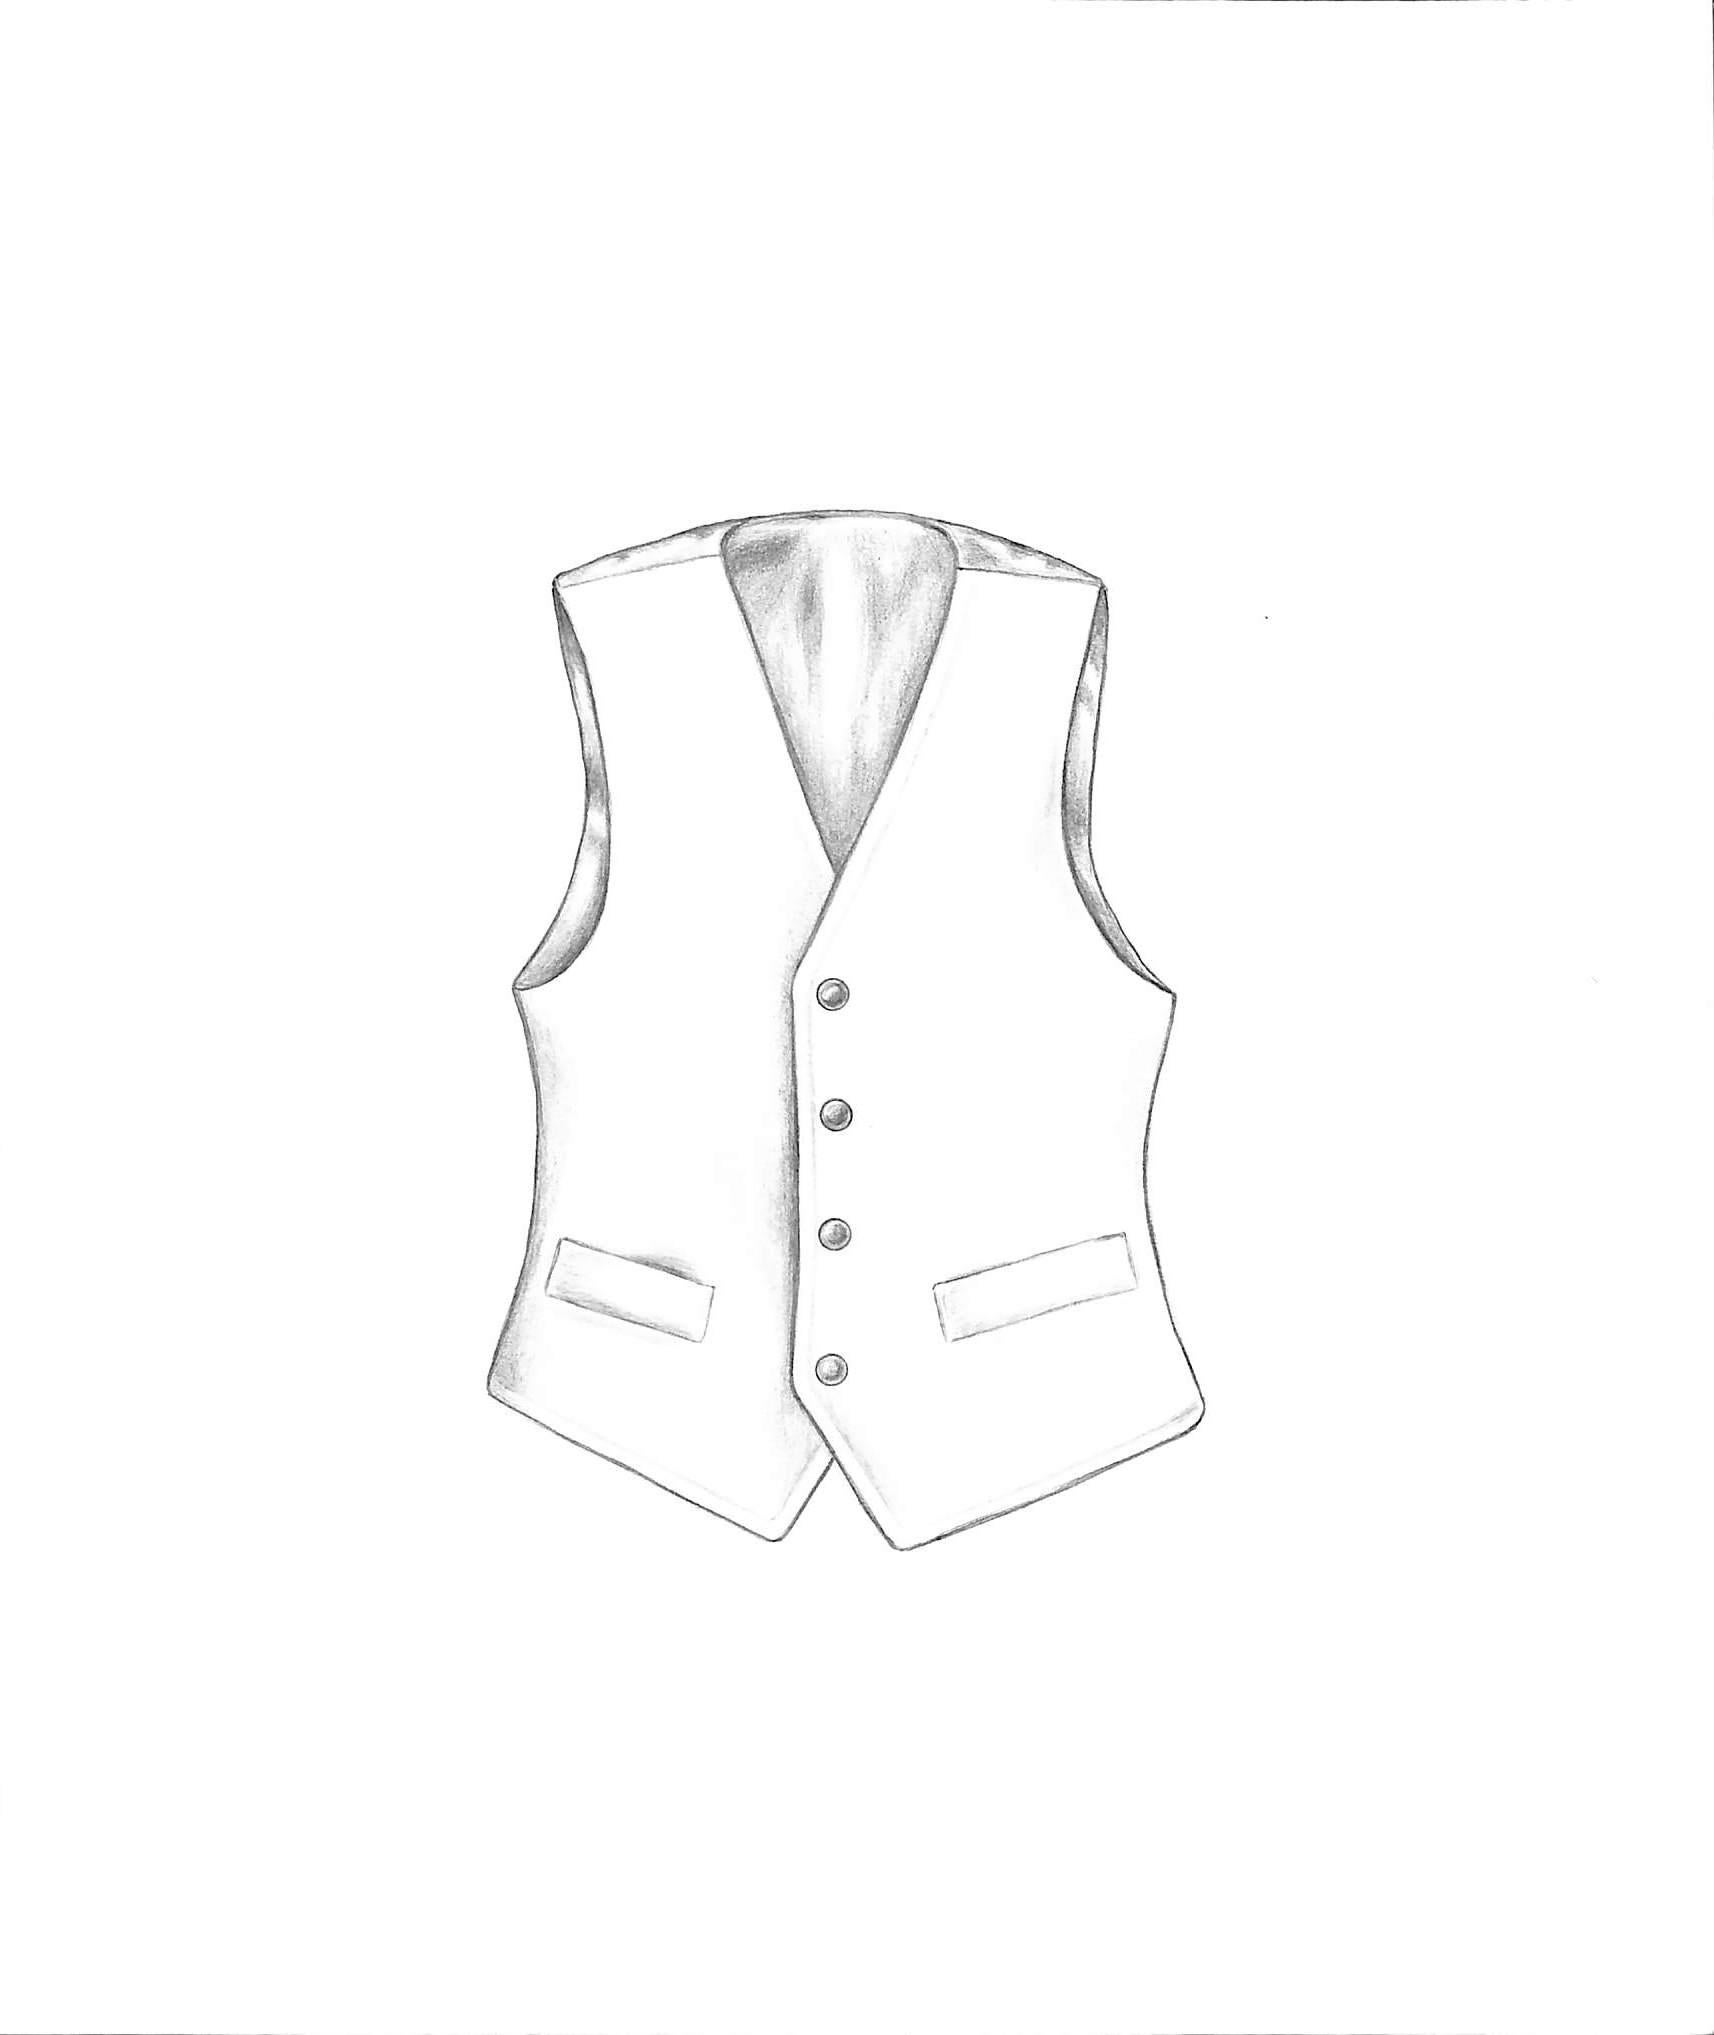 Childrens Canary Vest Graphite Drawing - Art by Unknown